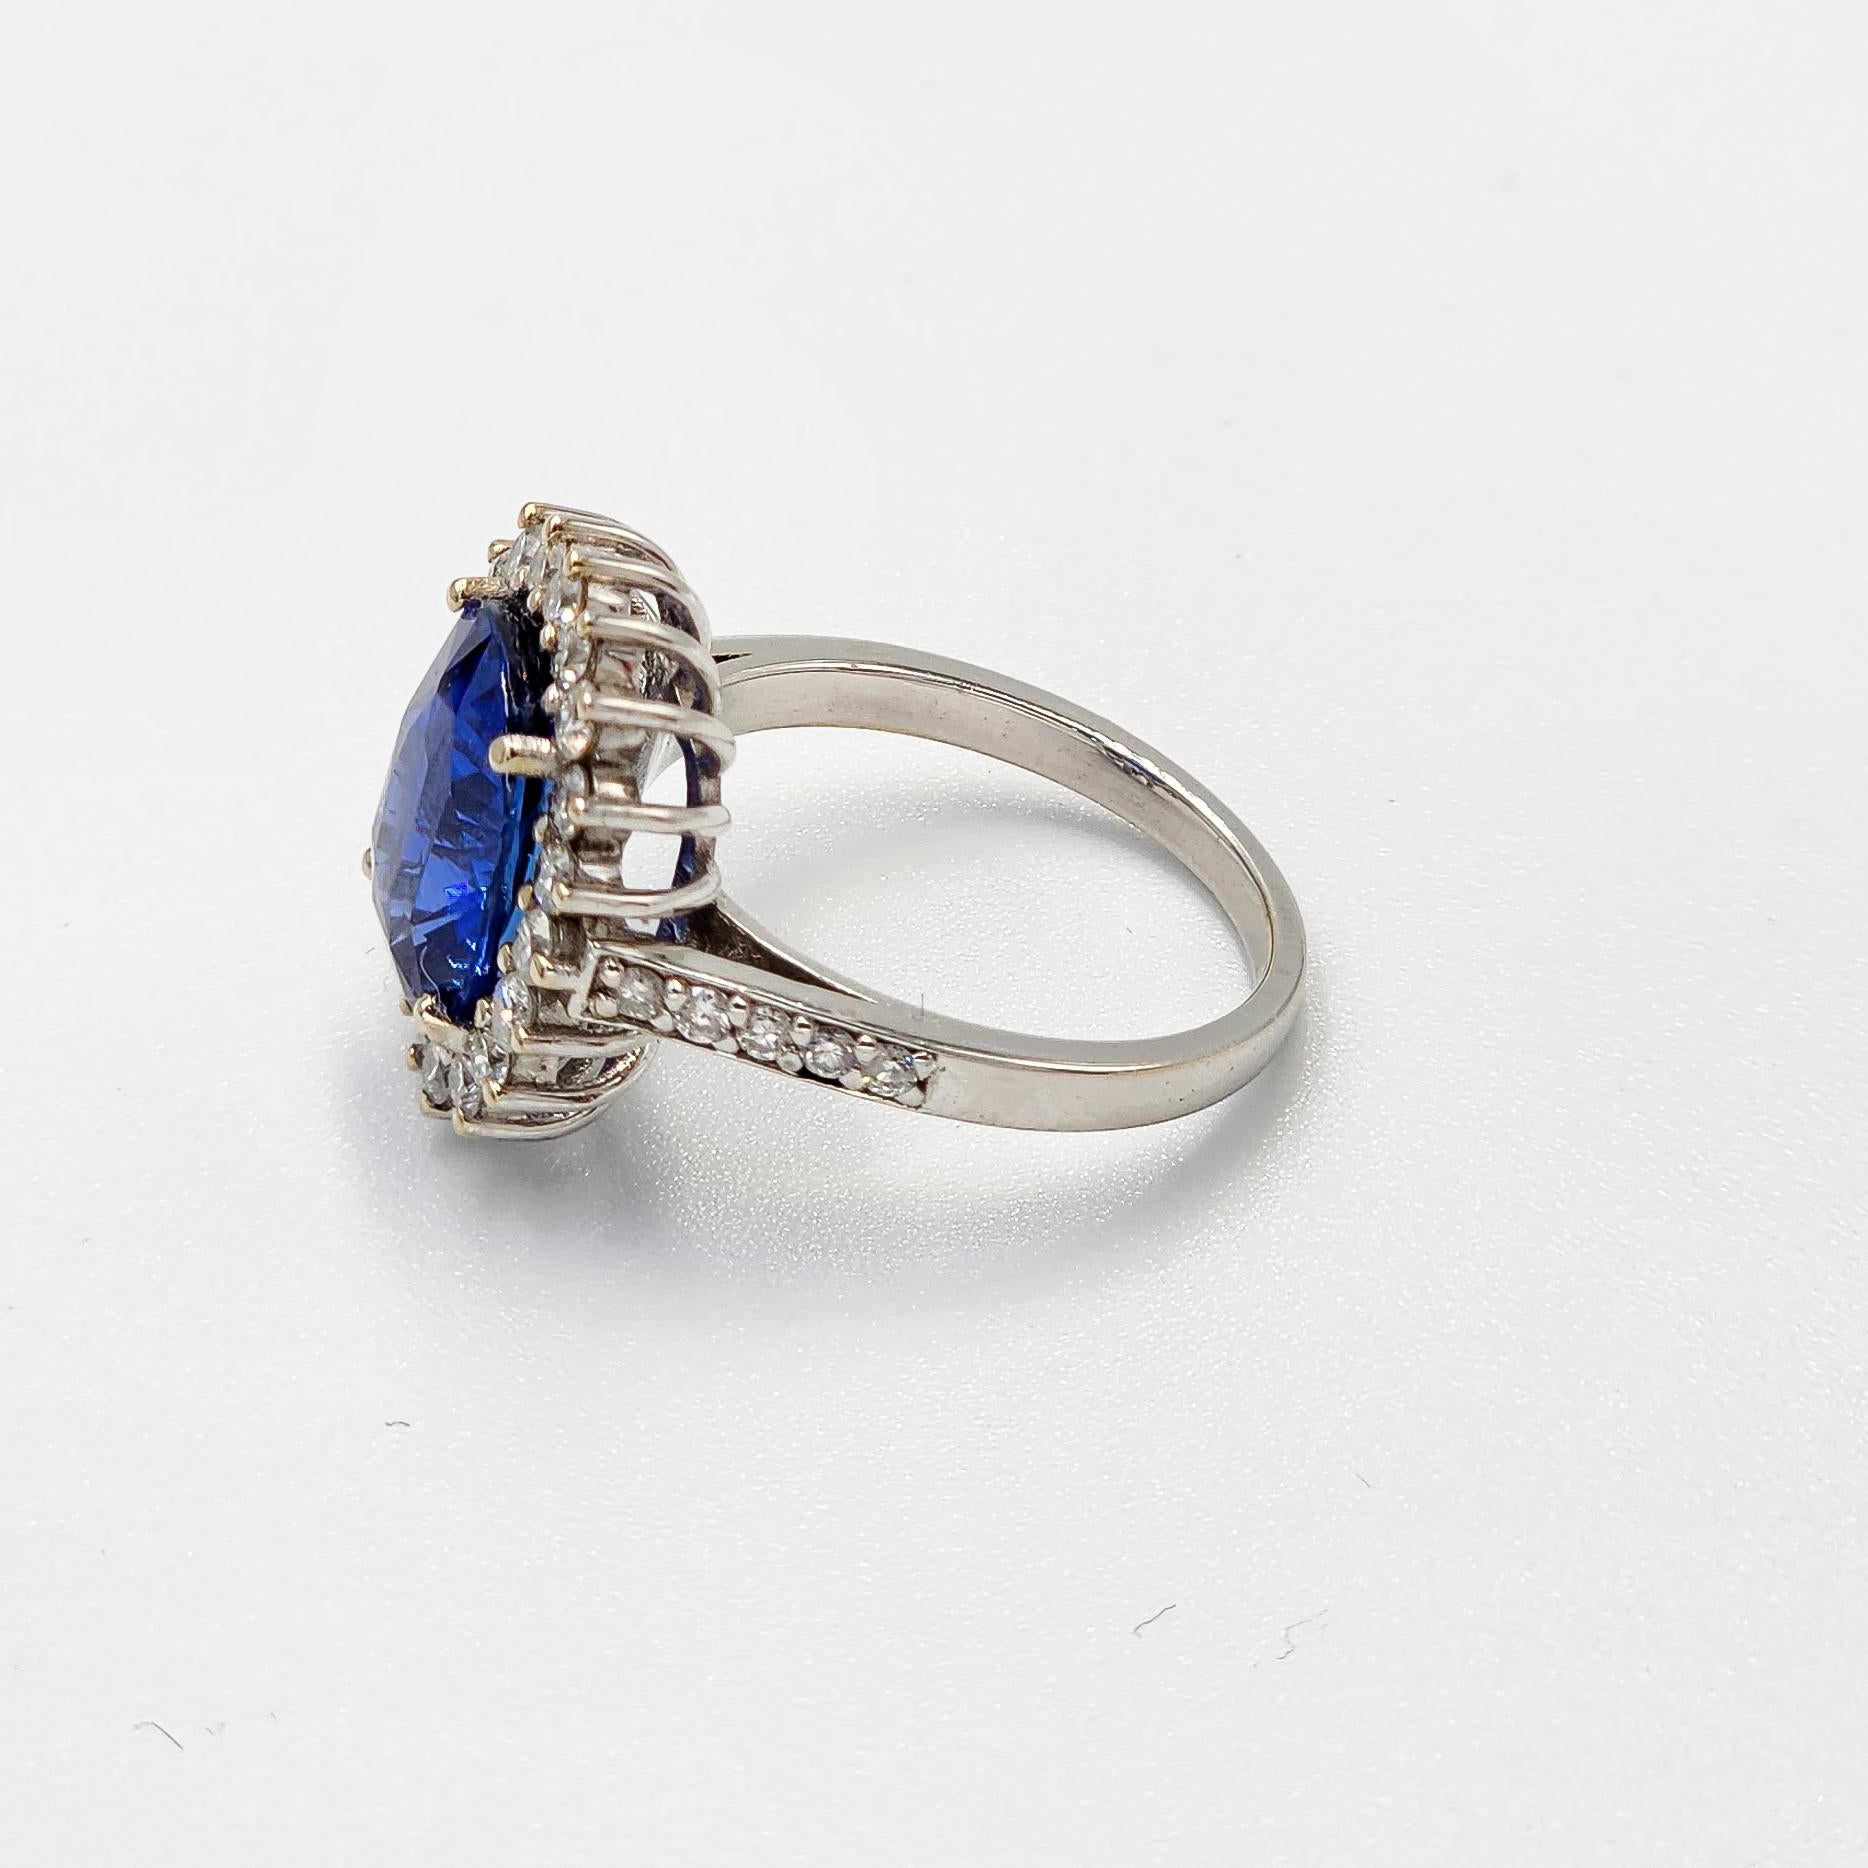 Cushion Cut GIA Certified 5.18 Carat Velvet Blue Sapphire Ring with Diamonds in 18k Gold For Sale